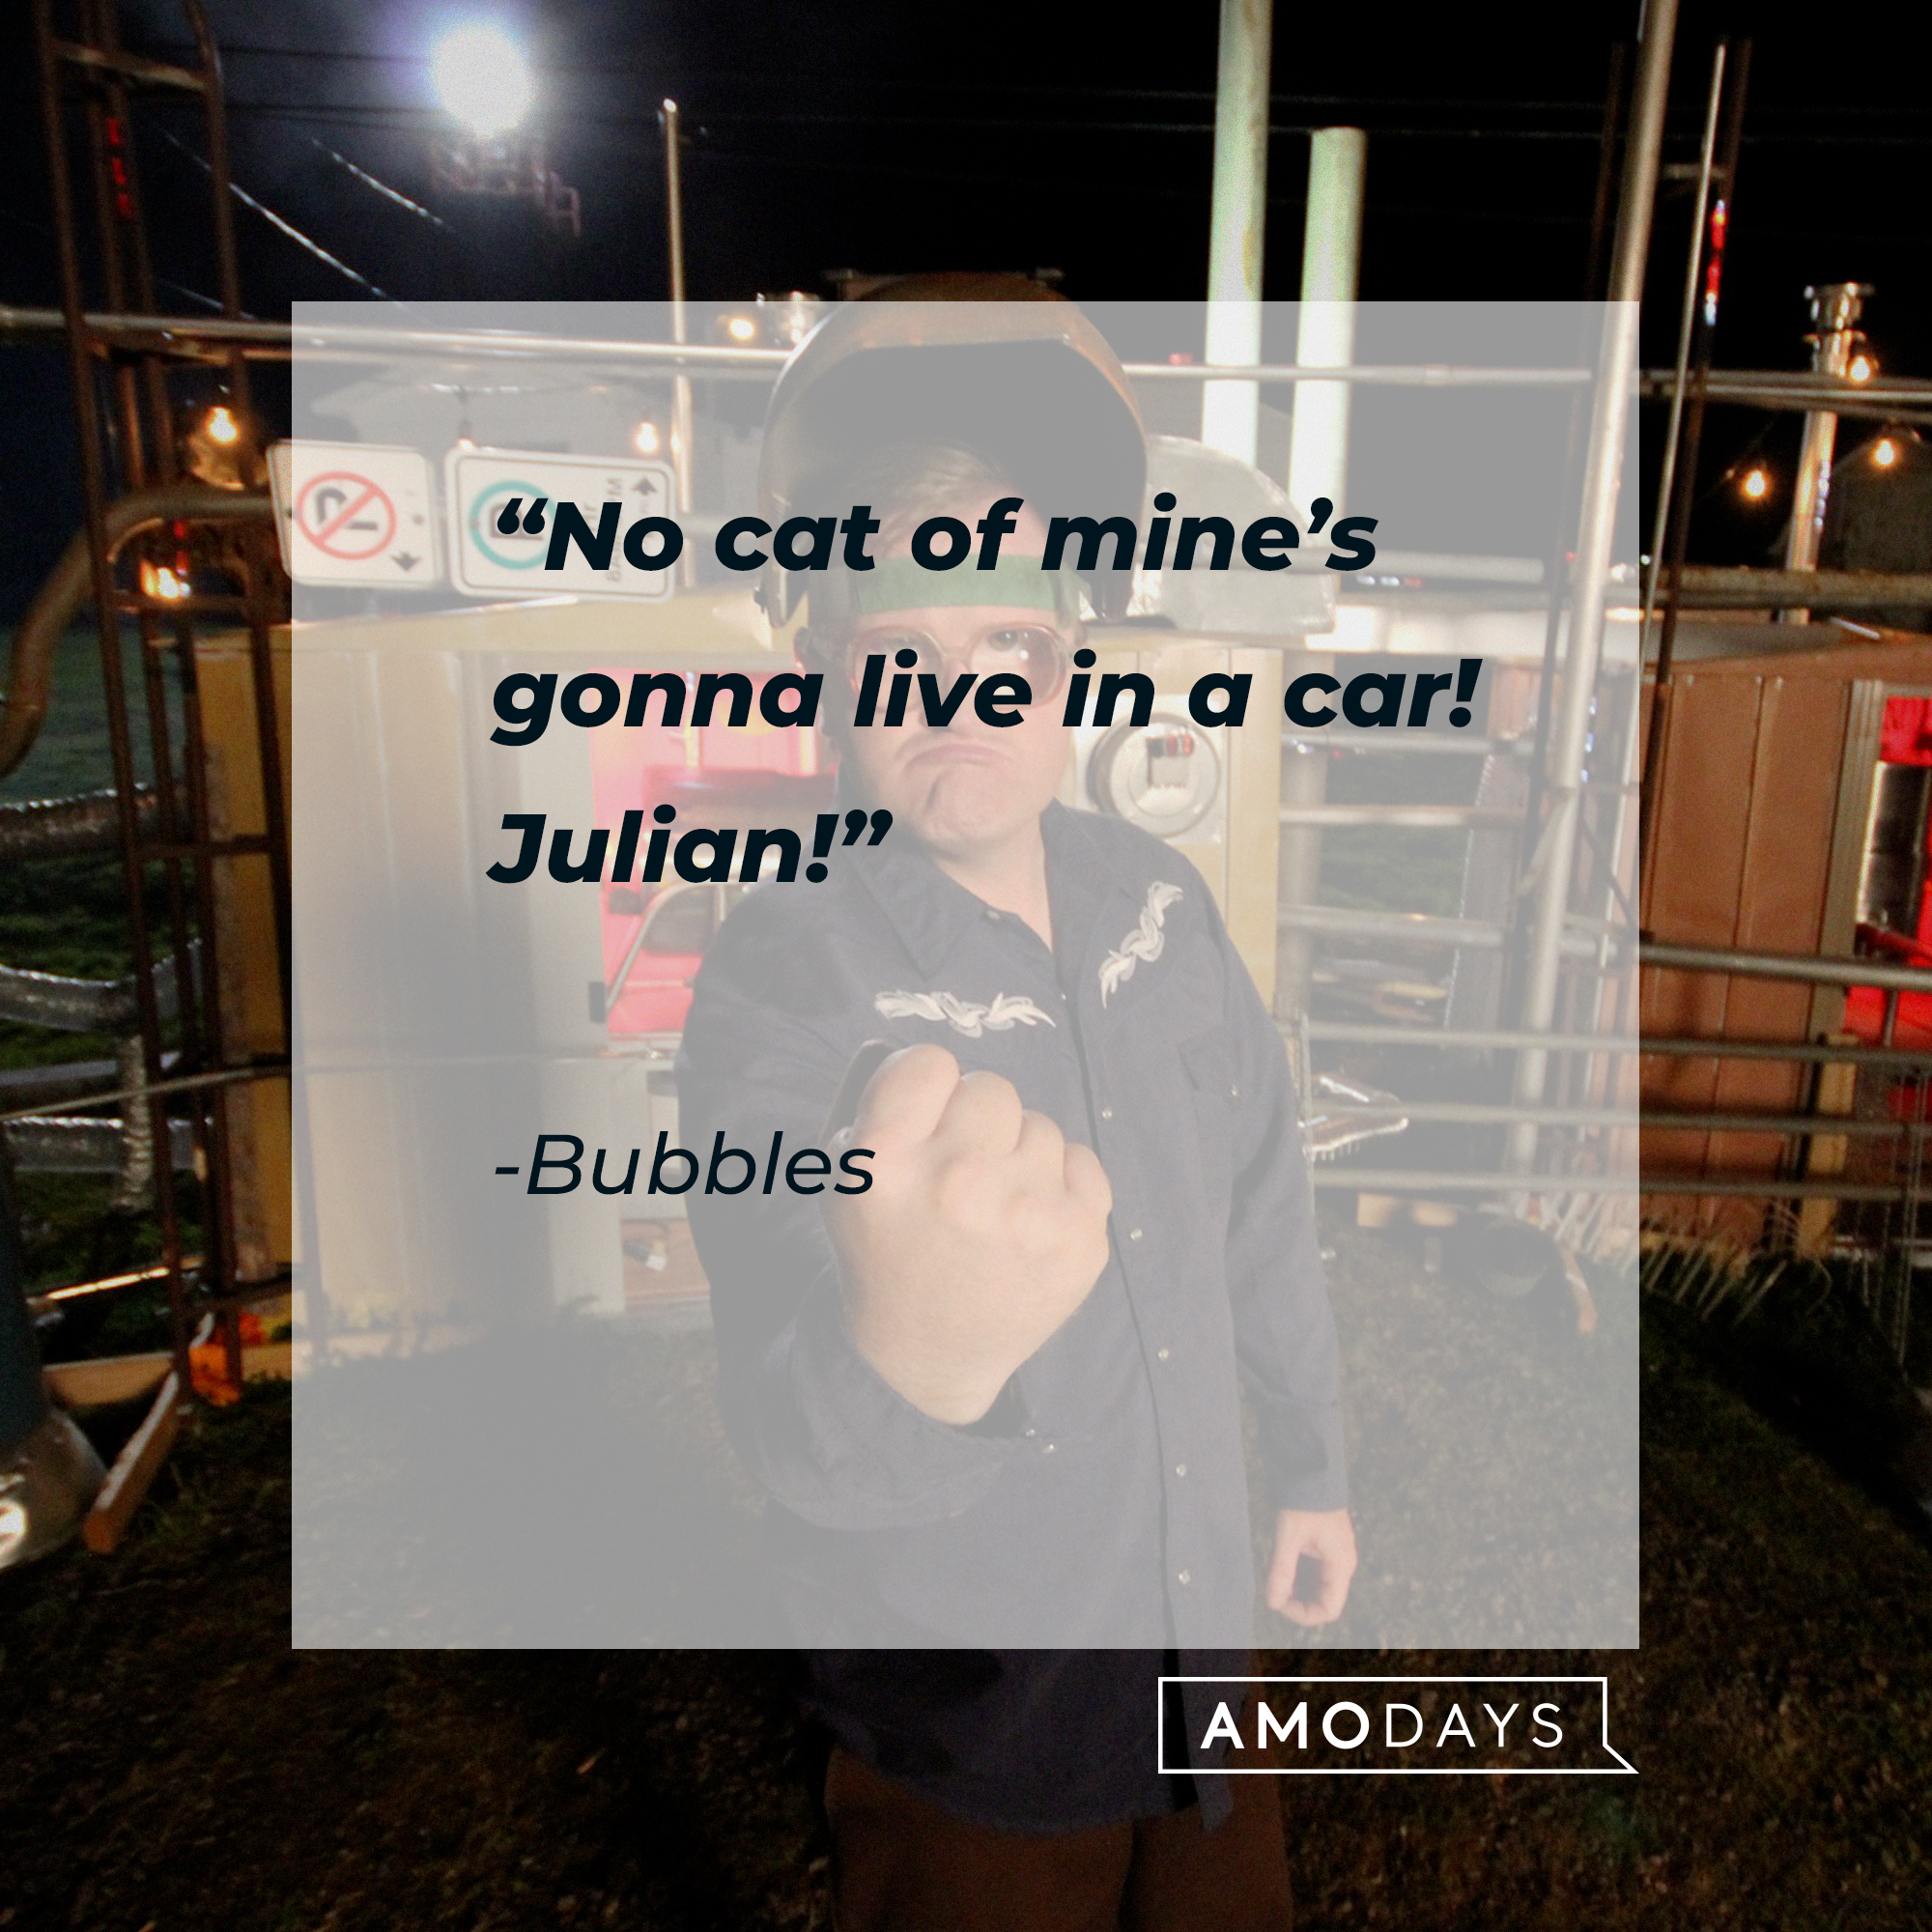 Bubbles's quote: “No cat of mine’s gonna live in a car! Julian!” | Source: facebook.com/trailerparkboys